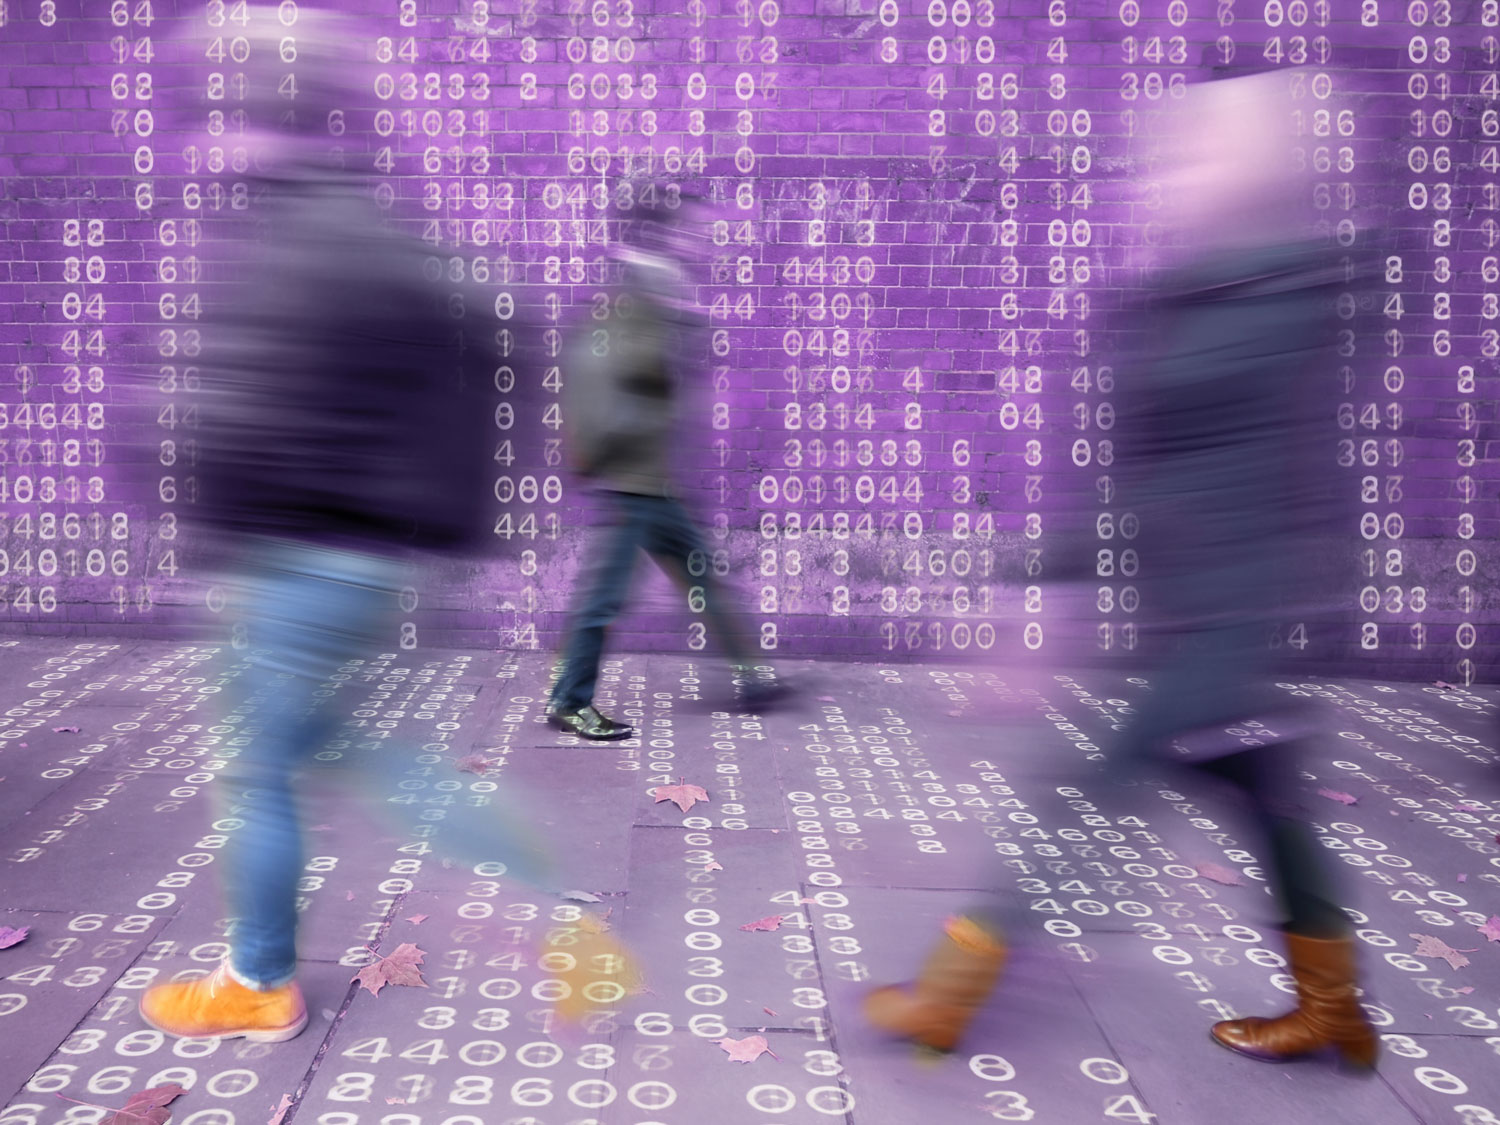 Motion blurred shot of people walking through city street with programming code in background